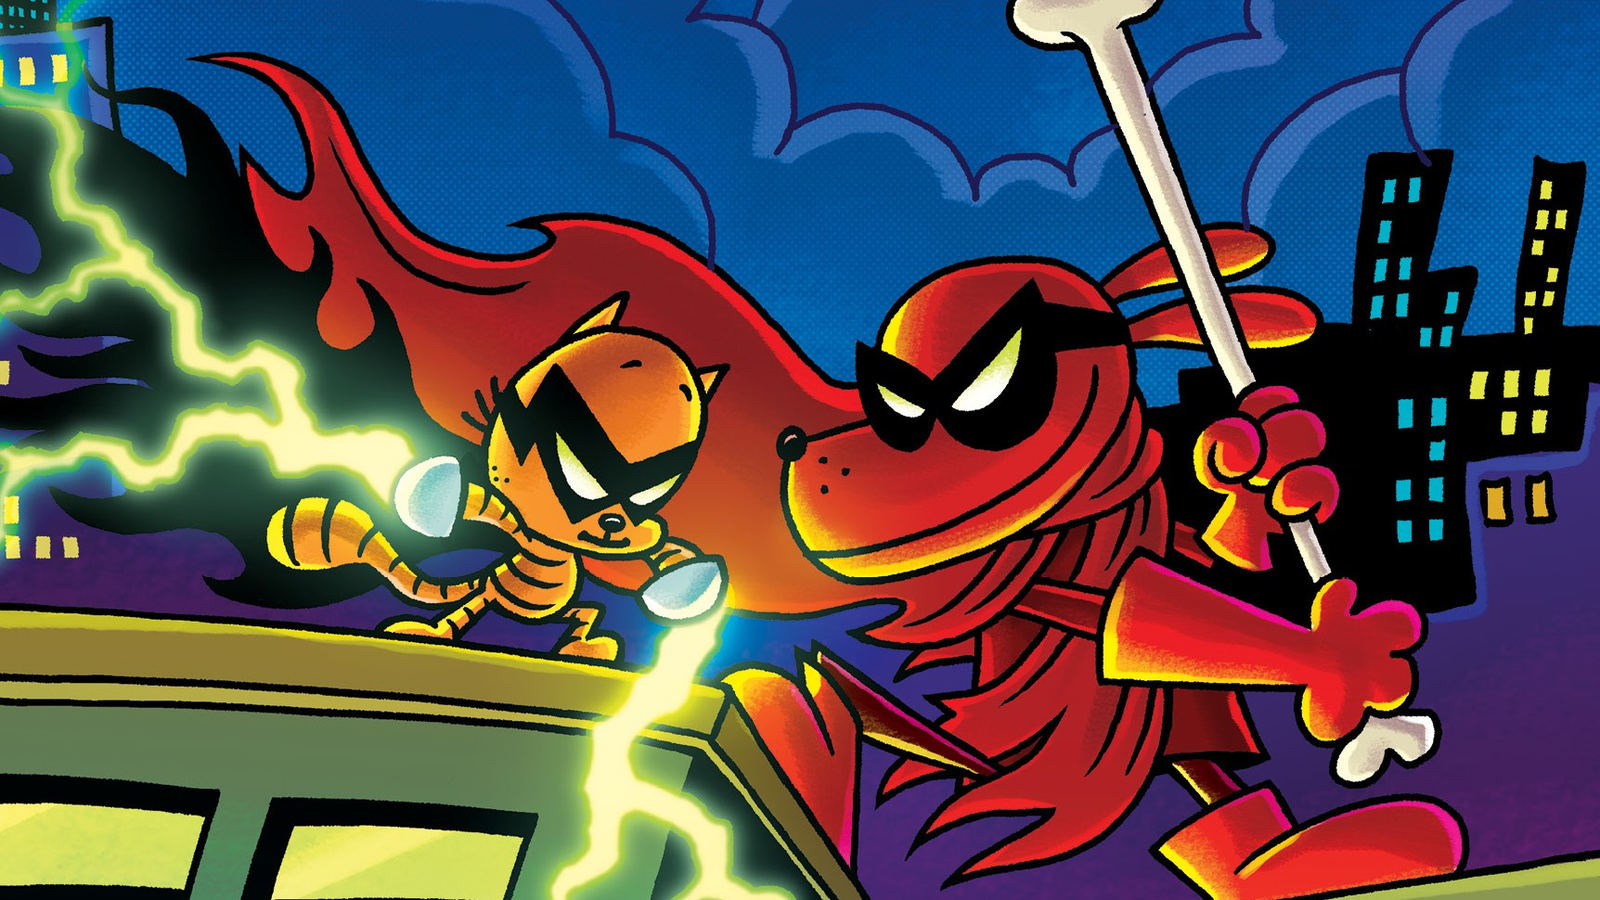 Dog Man sees red in Dav Pilkey's next guaranteed best-selling